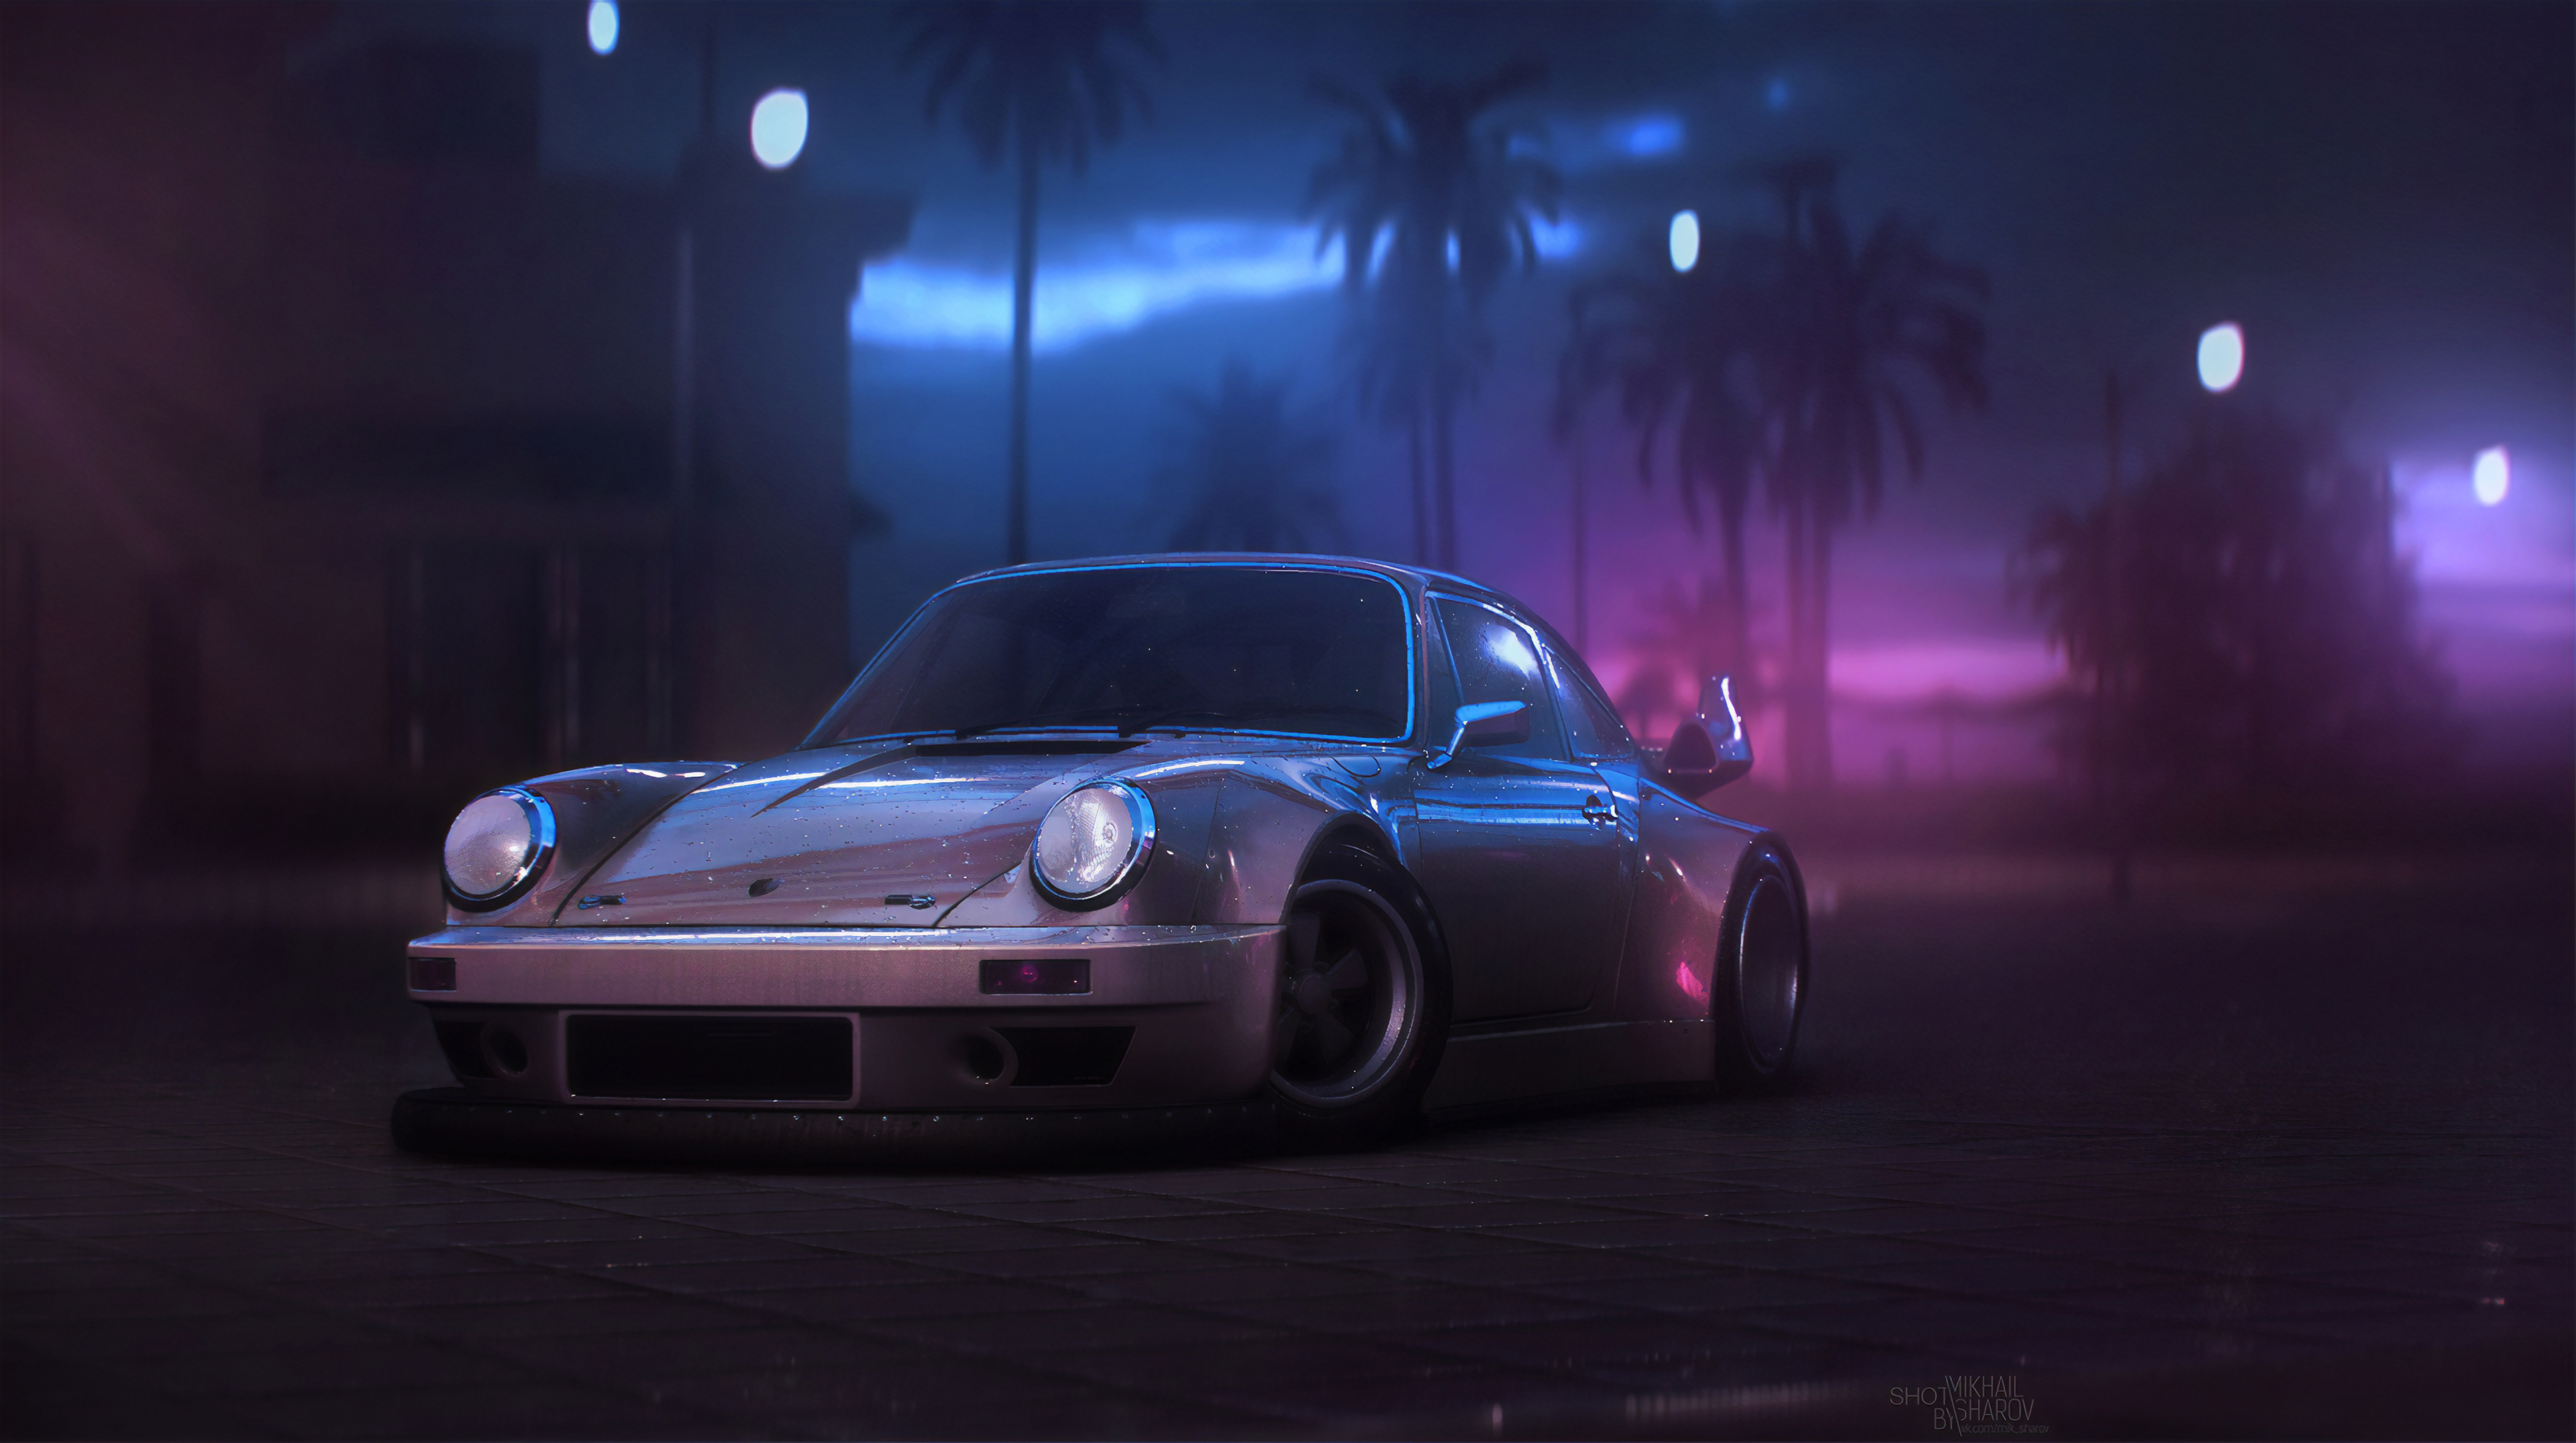 Porsche 911 Carrera RSR Need For Speed, HD Games, 4k Wallpapers, Images